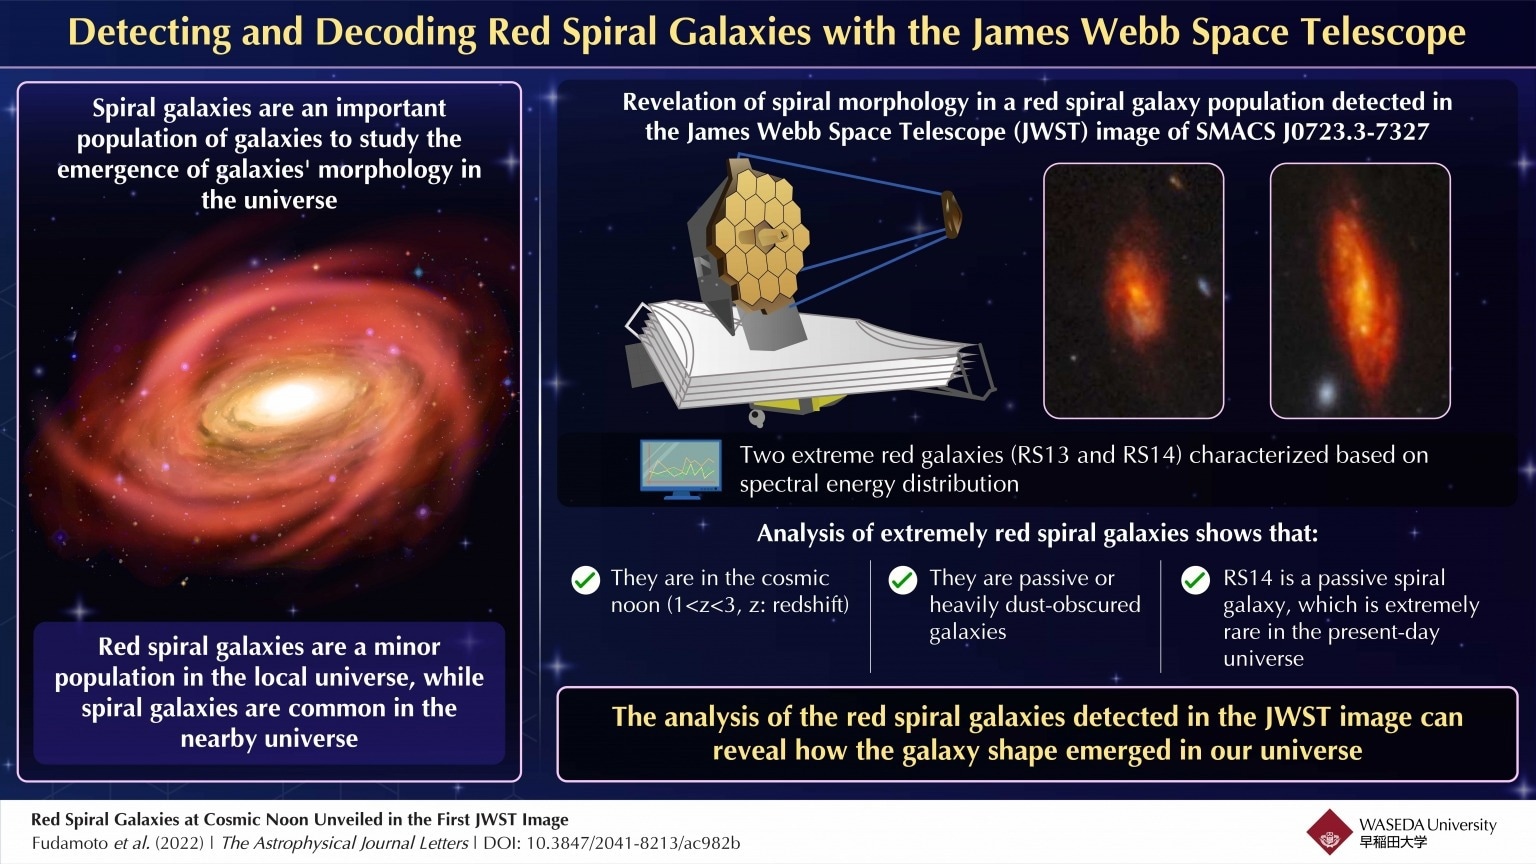 Detailed Morphology of Highly Redshifted Spiral Galaxies Revealed